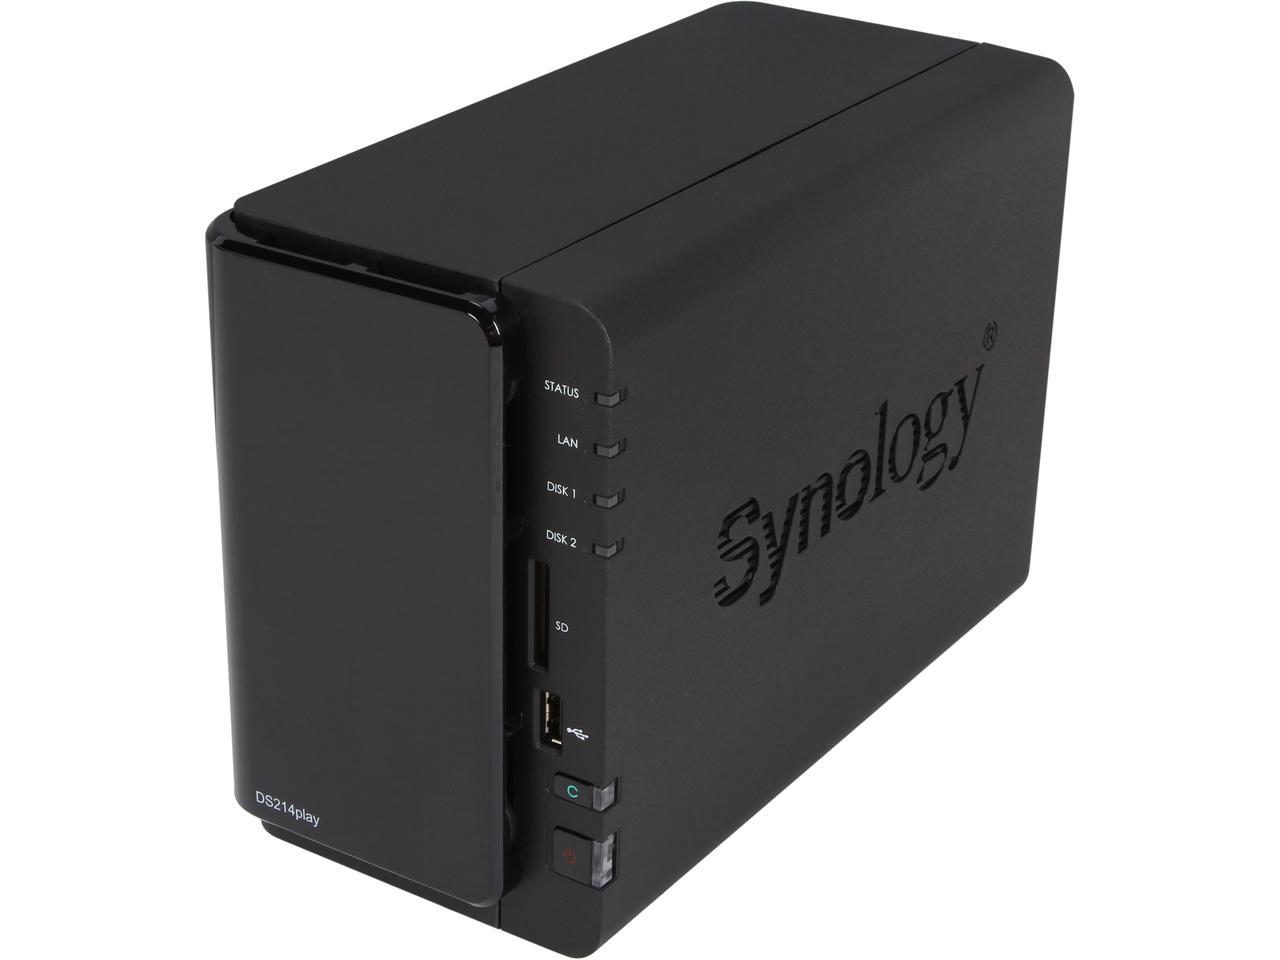 indoor Andrew Halliday Statistical Synology DS214play Network Storage - Newegg.com